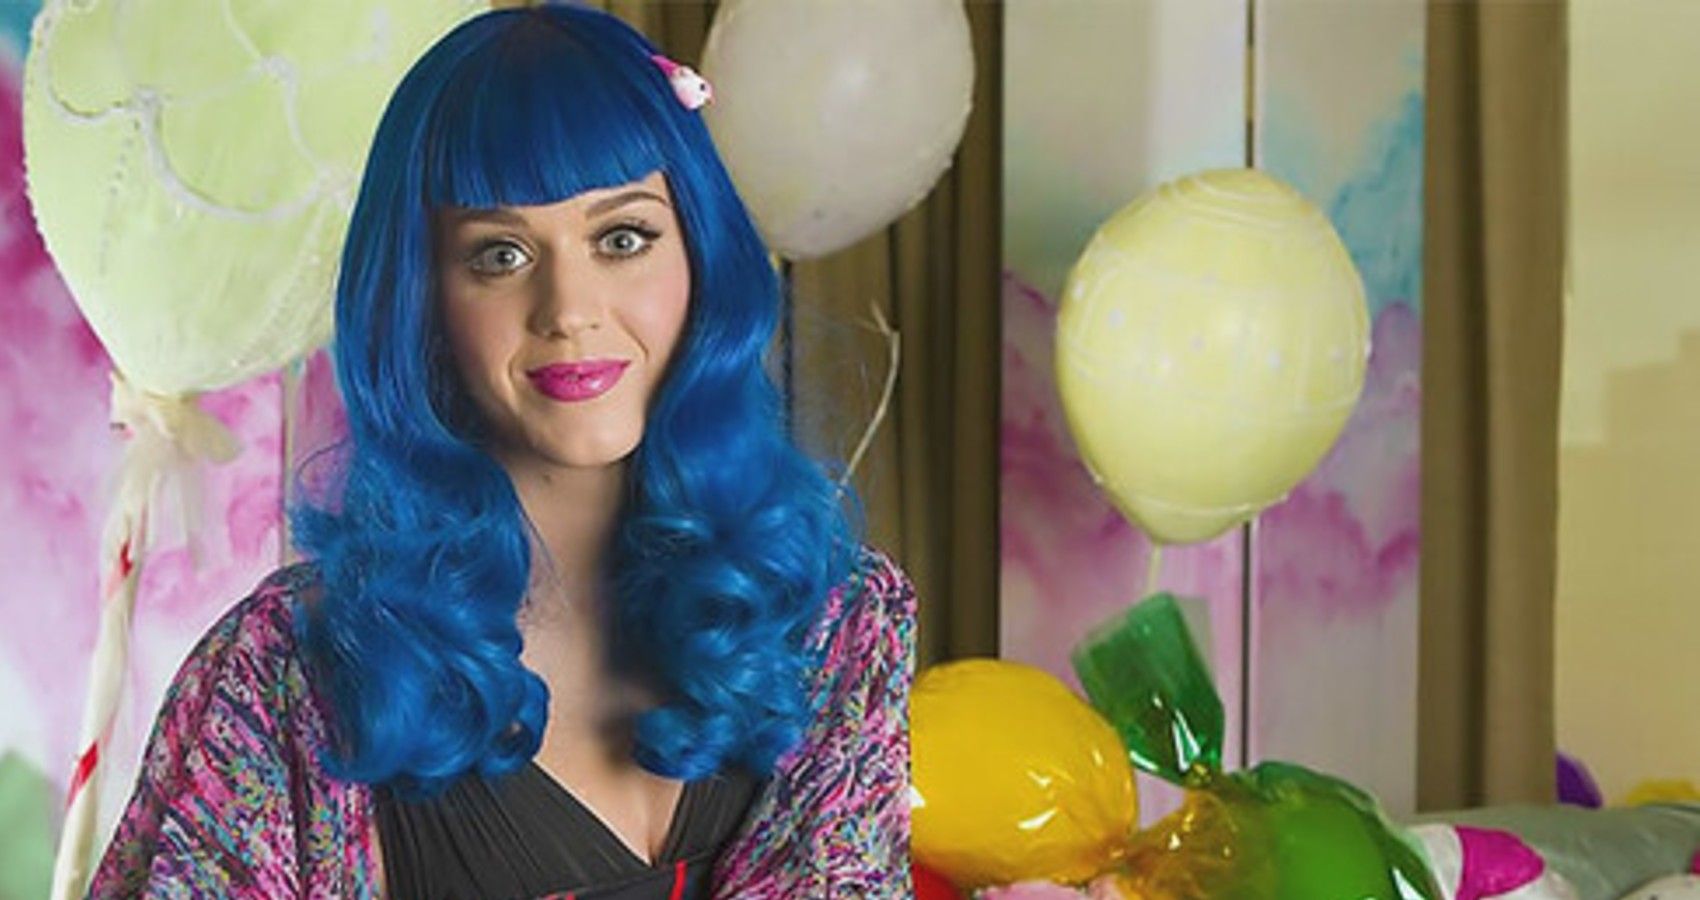 Katy Perry sitting with balloons and blus hair